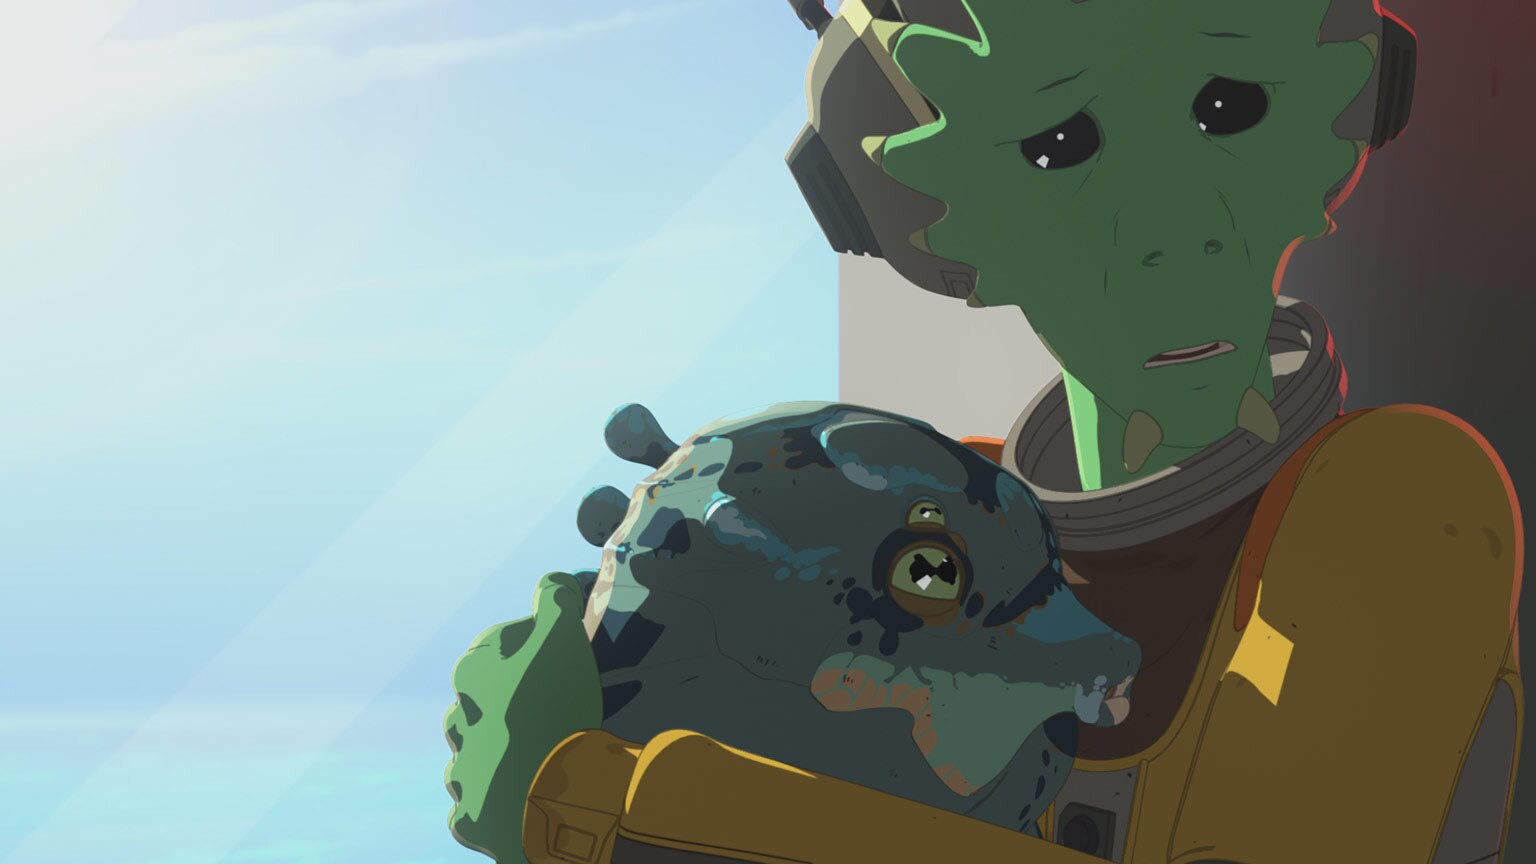 Bucket's List Extra: 9 Fun Facts from "Bibo" - Star Wars Resistance